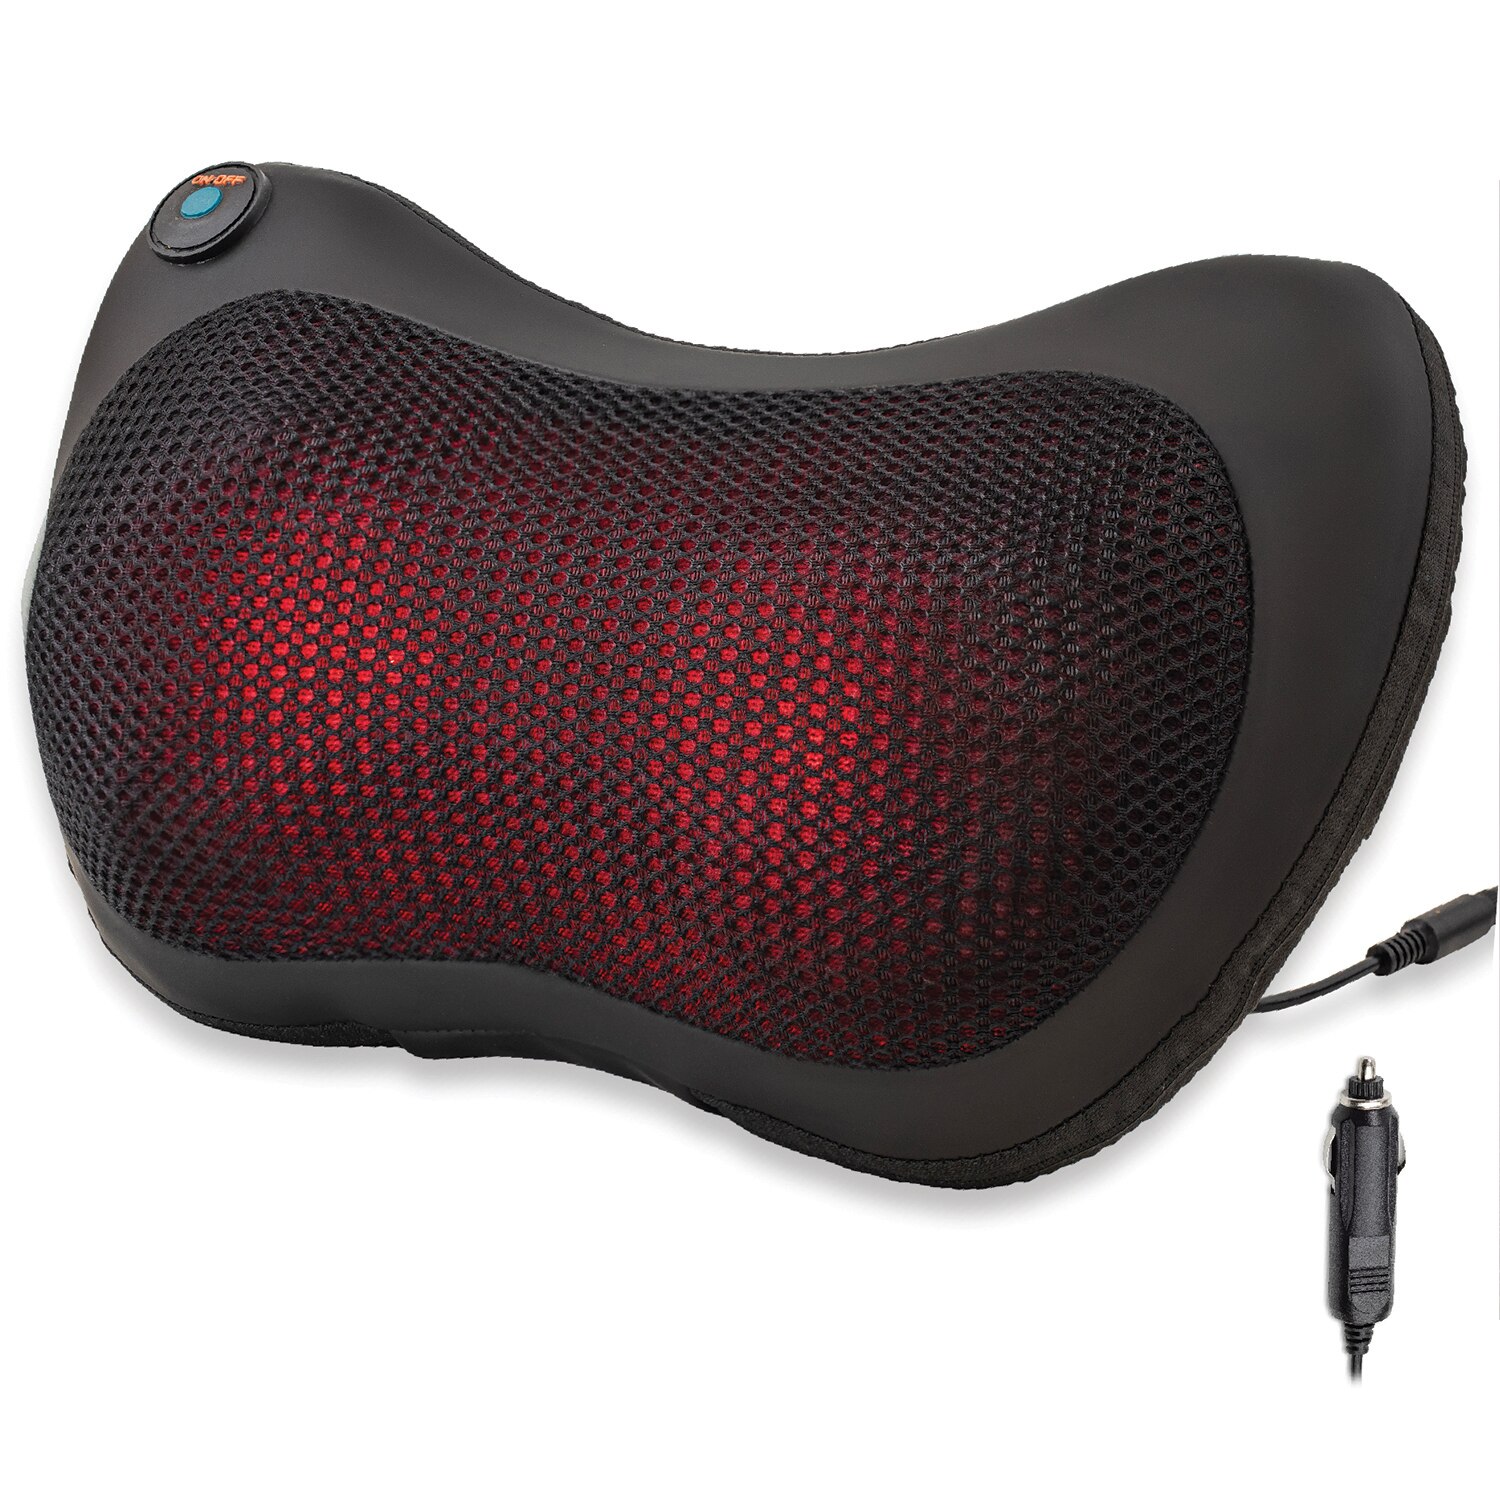 Back & Neck (Heated) Massager Review